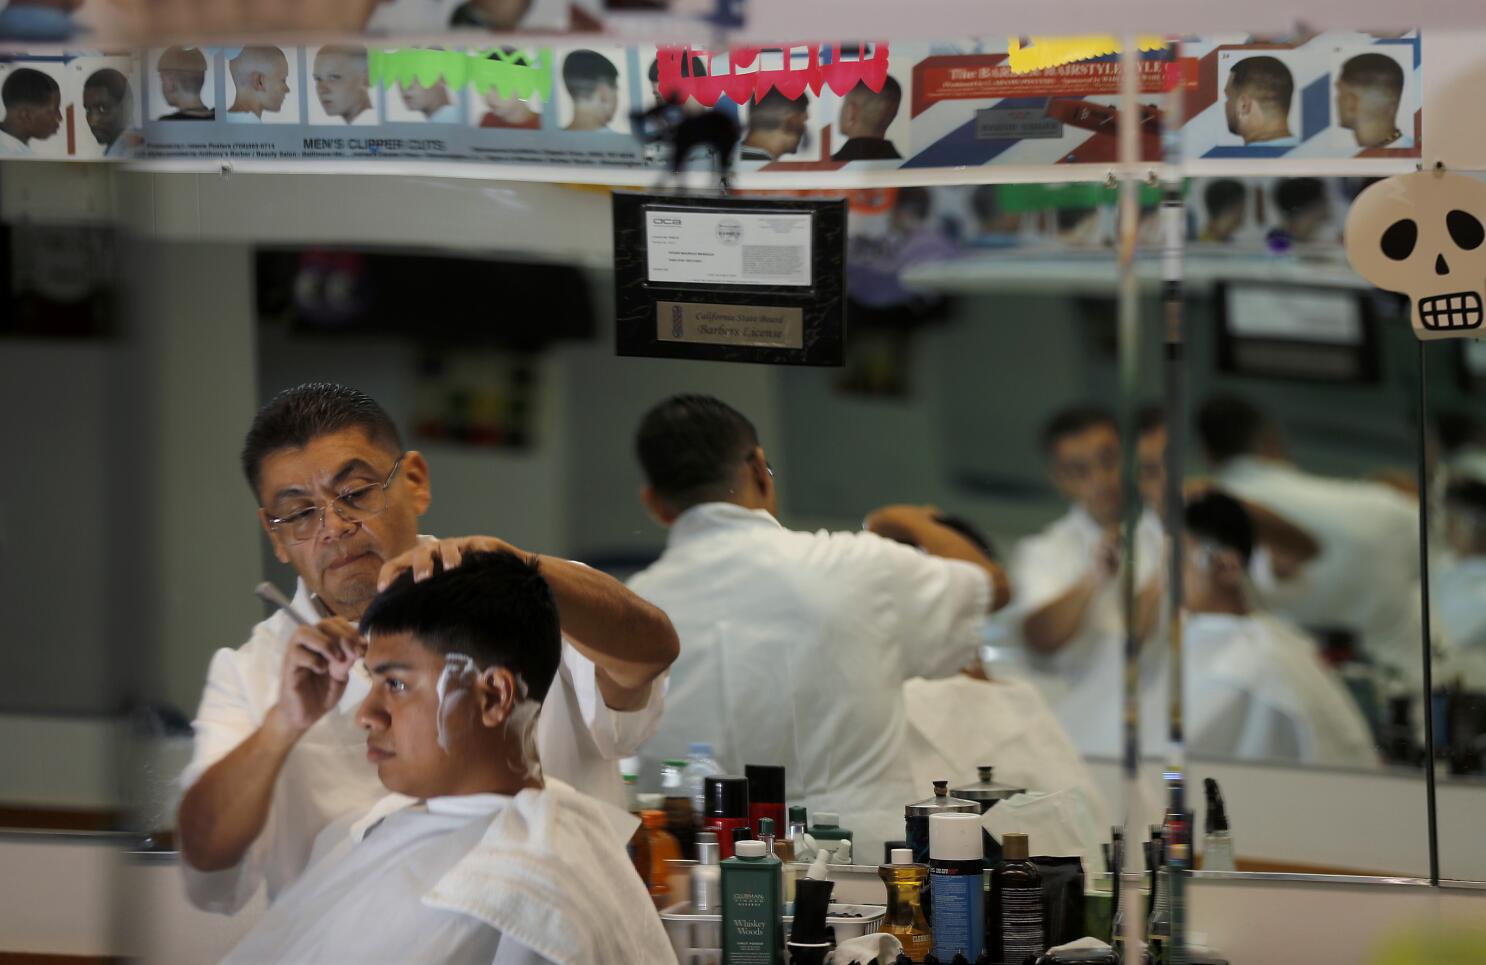 Edgar Haircut. It's Cultural Heritage. Here's Why